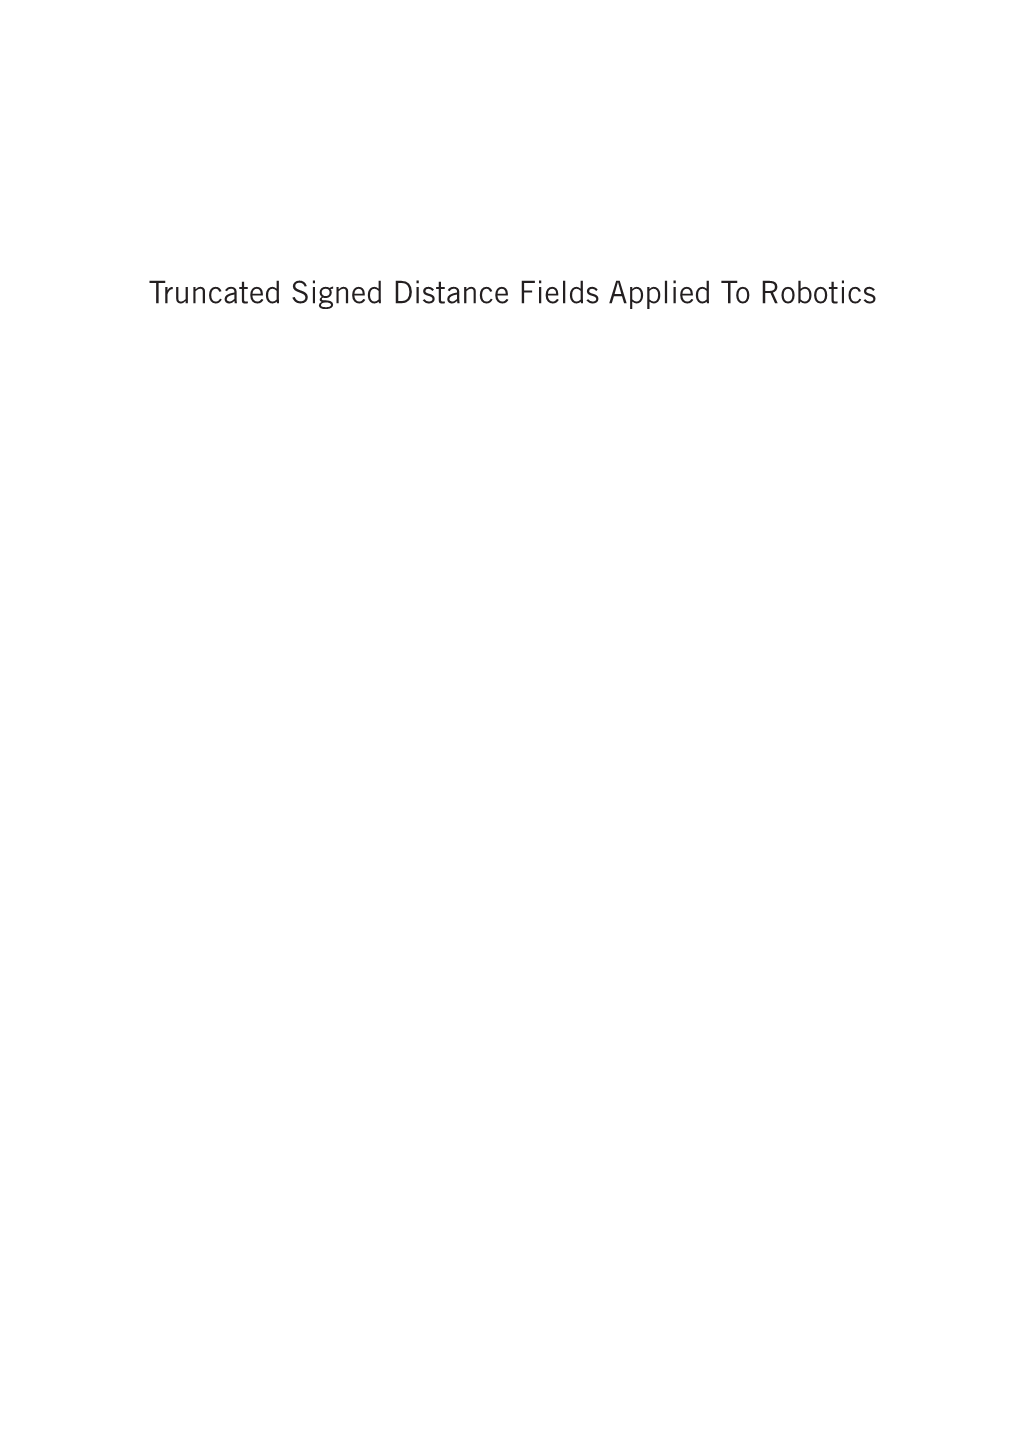 Truncated Signed Distance Fields Applied to Robotics